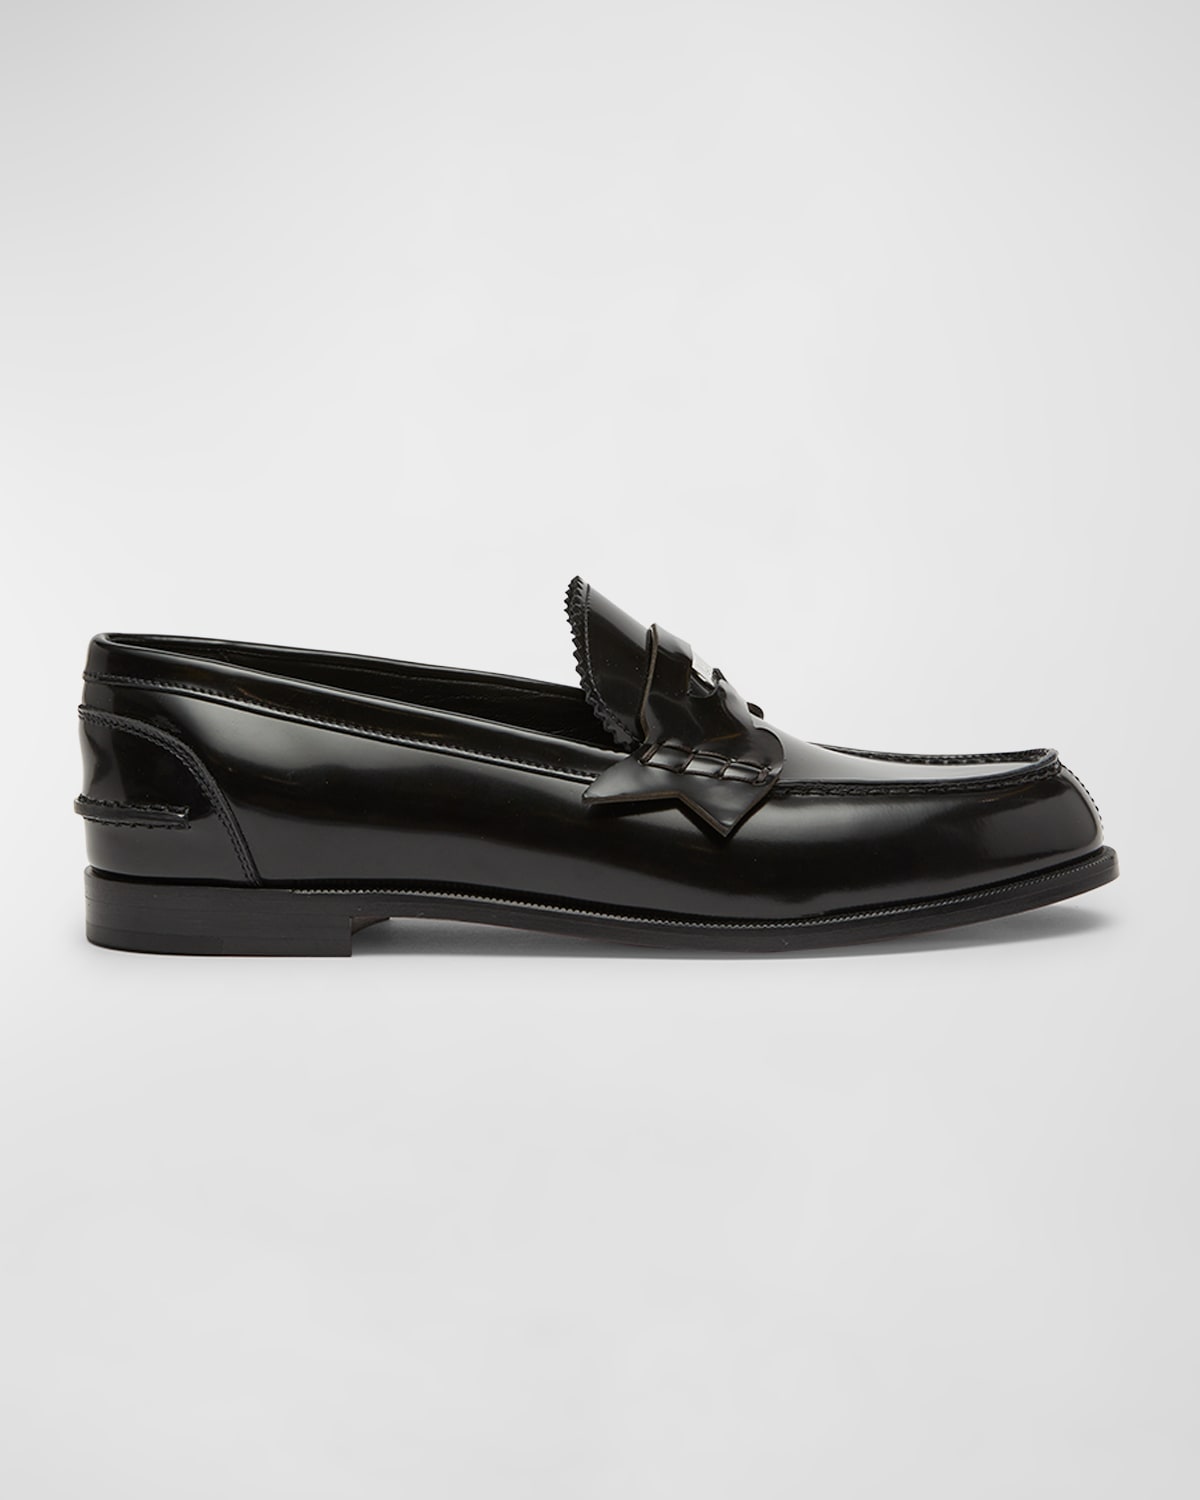 Christian Louboutin LOCK ME MOC Turnlock Leather Loafer Flat